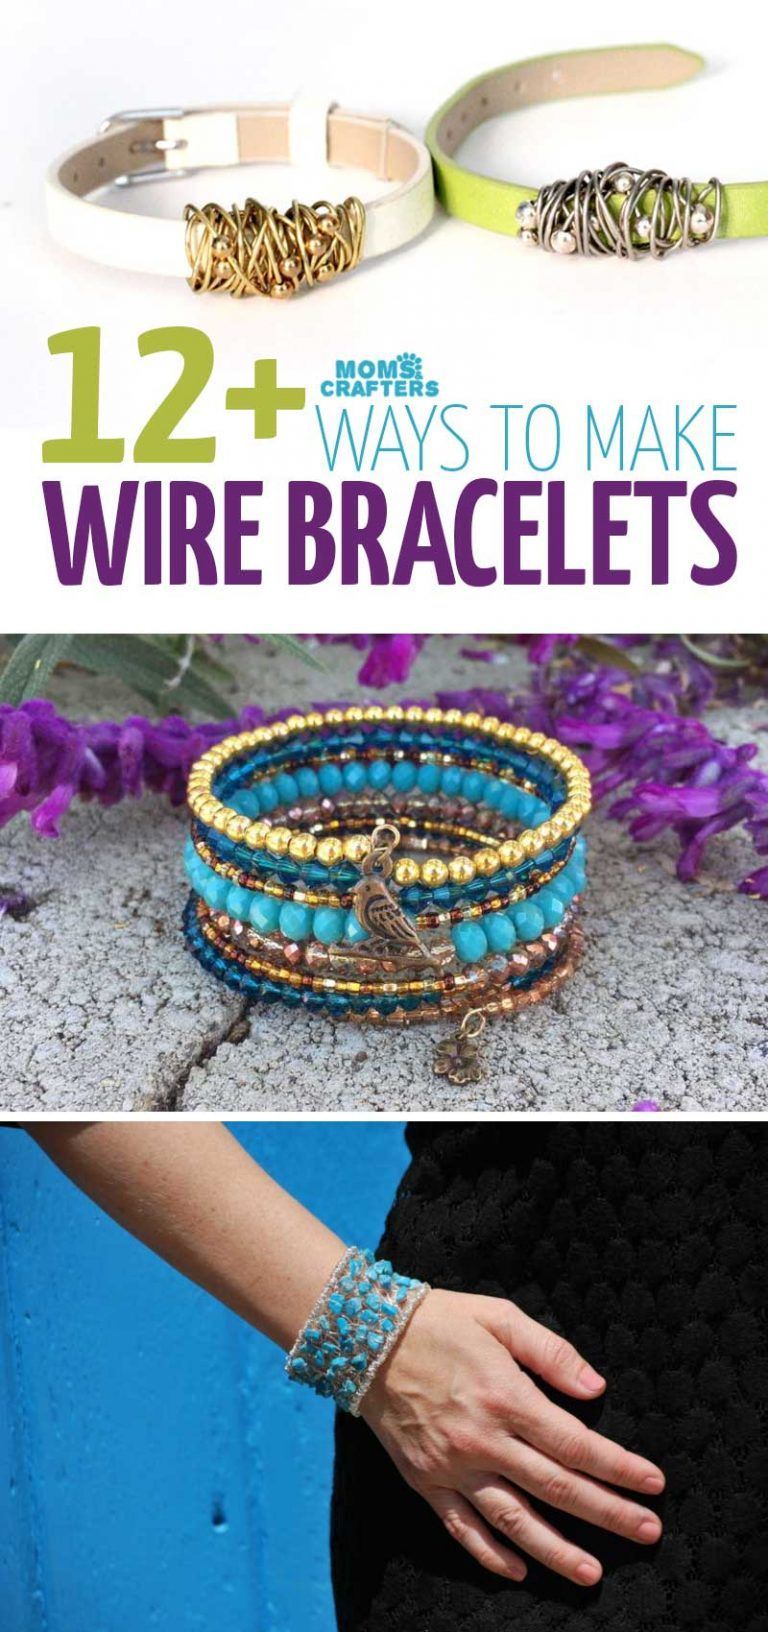 How to Make Wire Bracelets - wire wrapping, bangles, memory wire and more! -   diy Bracelets adjustable